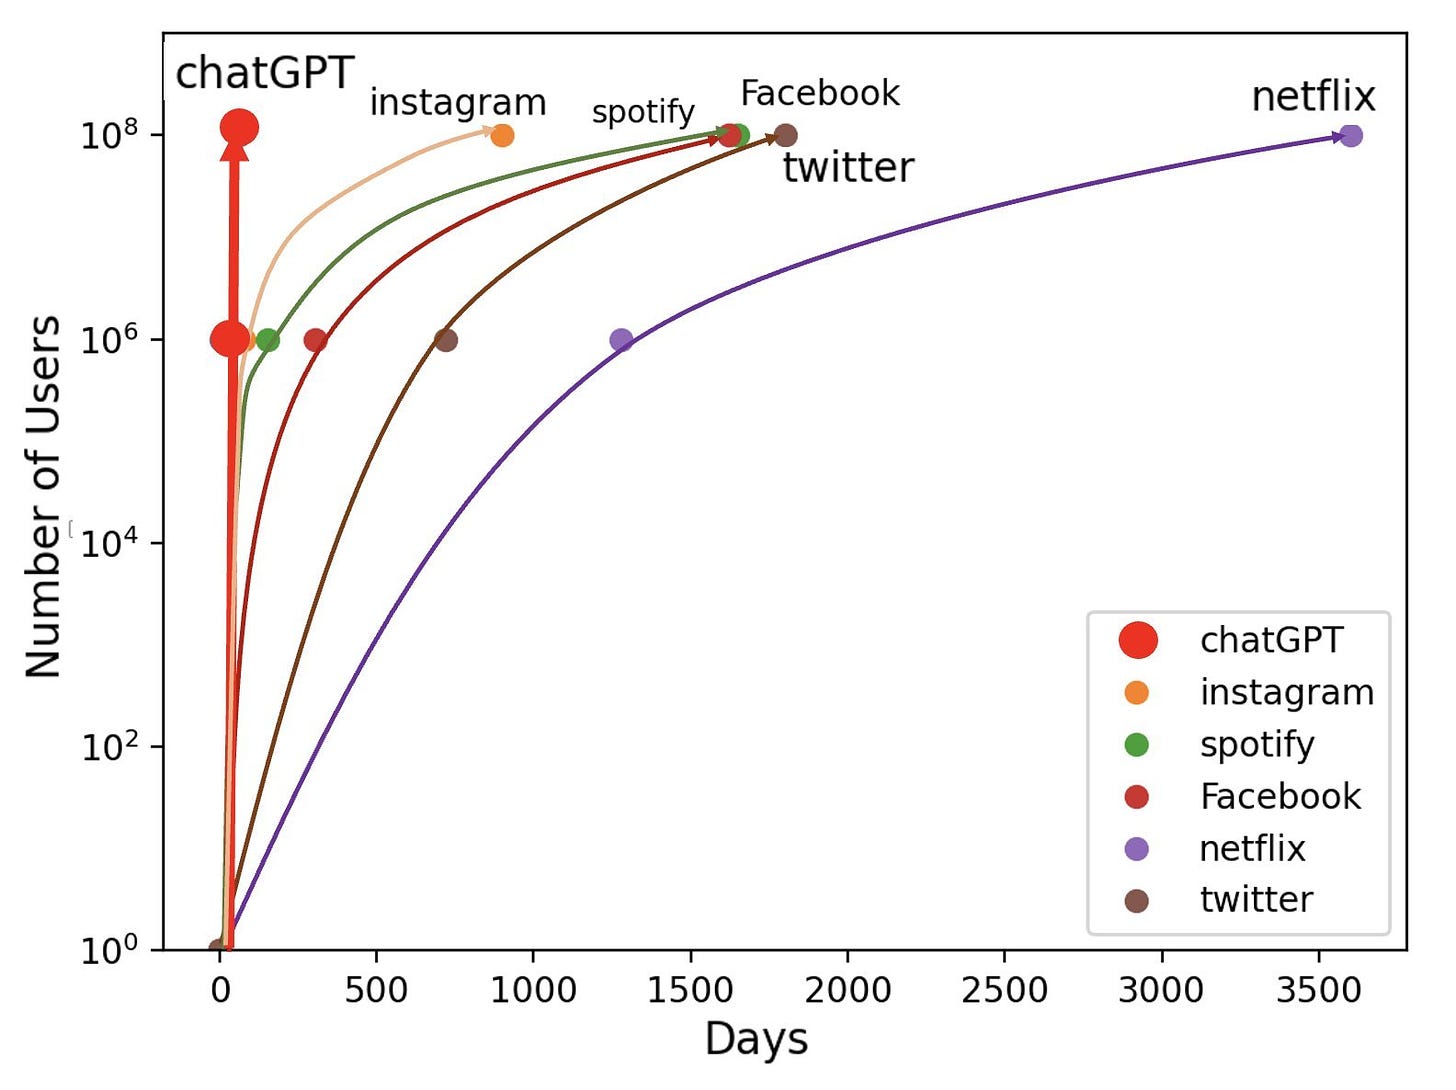 Aadit Sheth on X: "9. ChatGPT is the fastest to 100 million users • Netflix  took 9 years • Twitter took 4 years • Instagram took less than 3 years •  ChatGPT took 2 months 🤯 https://t.co/Uqis6yPJTc" / X